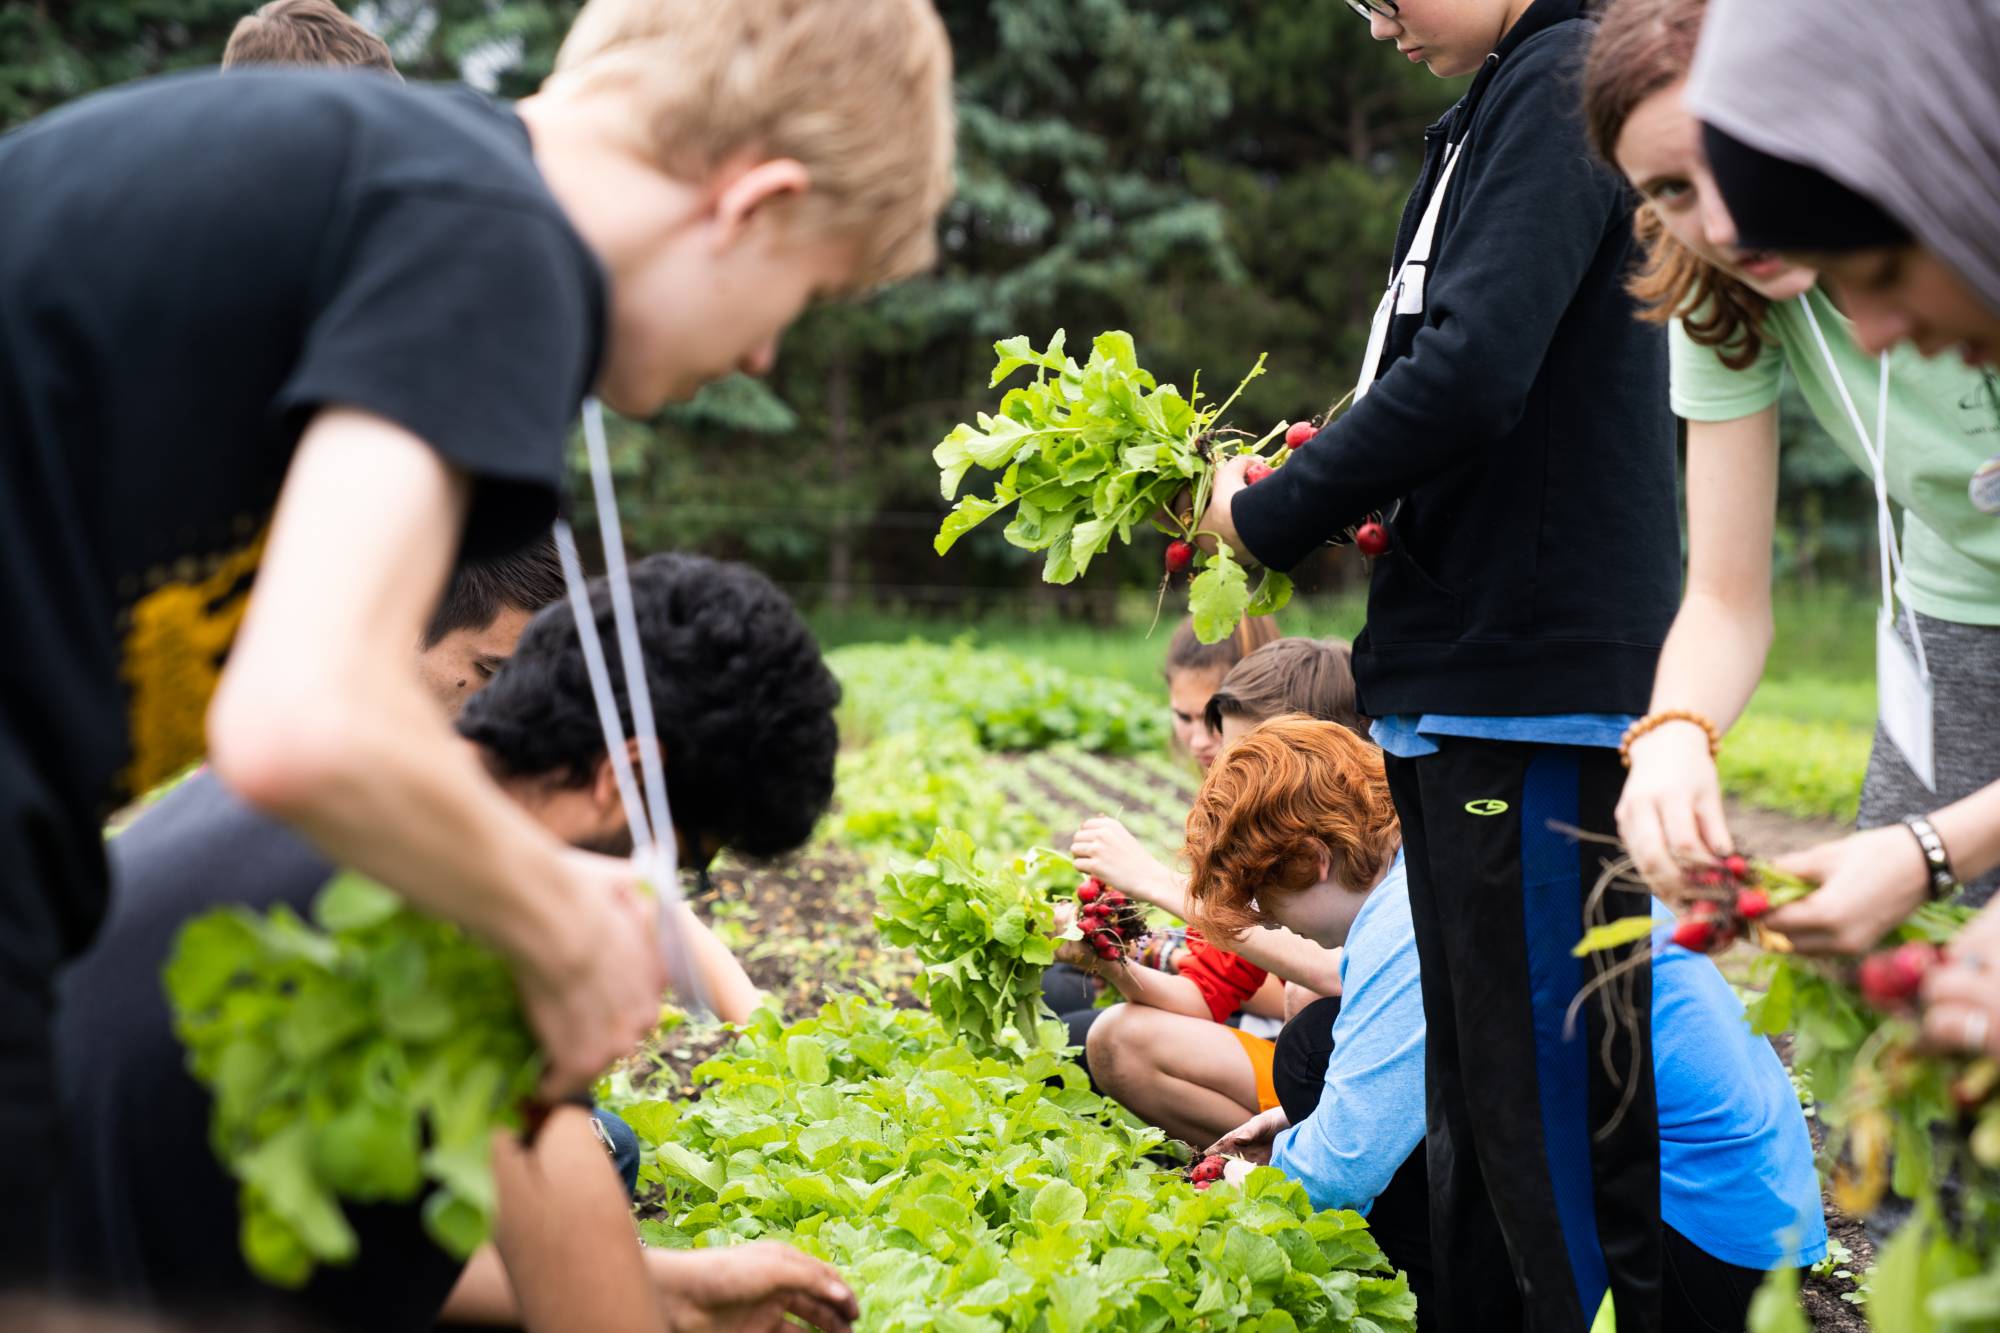 Students work on crops at Plainsong Farm